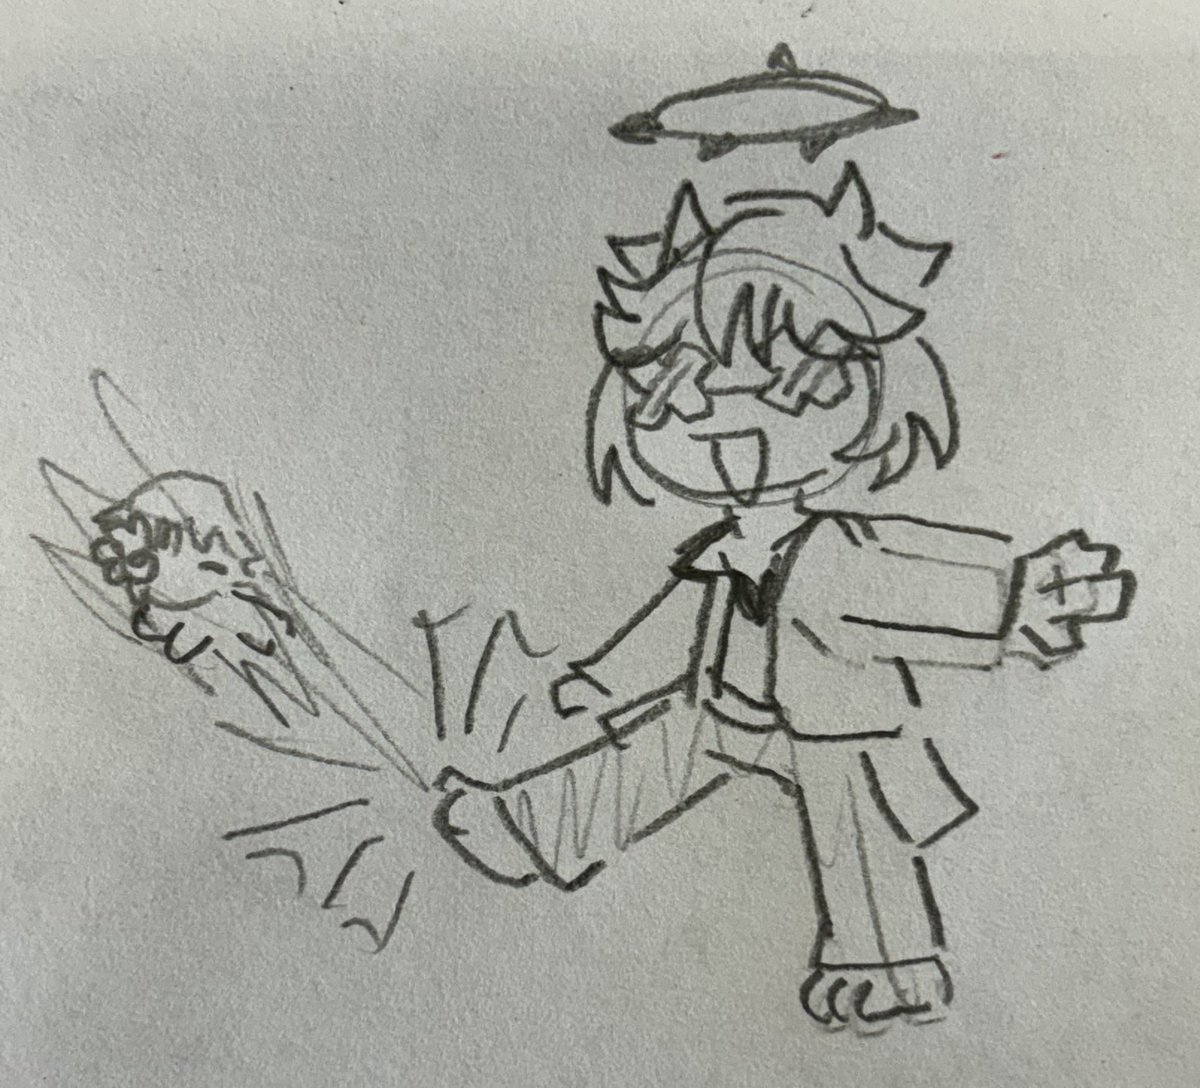 happy chaos no!!! do not kick the little asuker!!! its just a baby!!!!!!